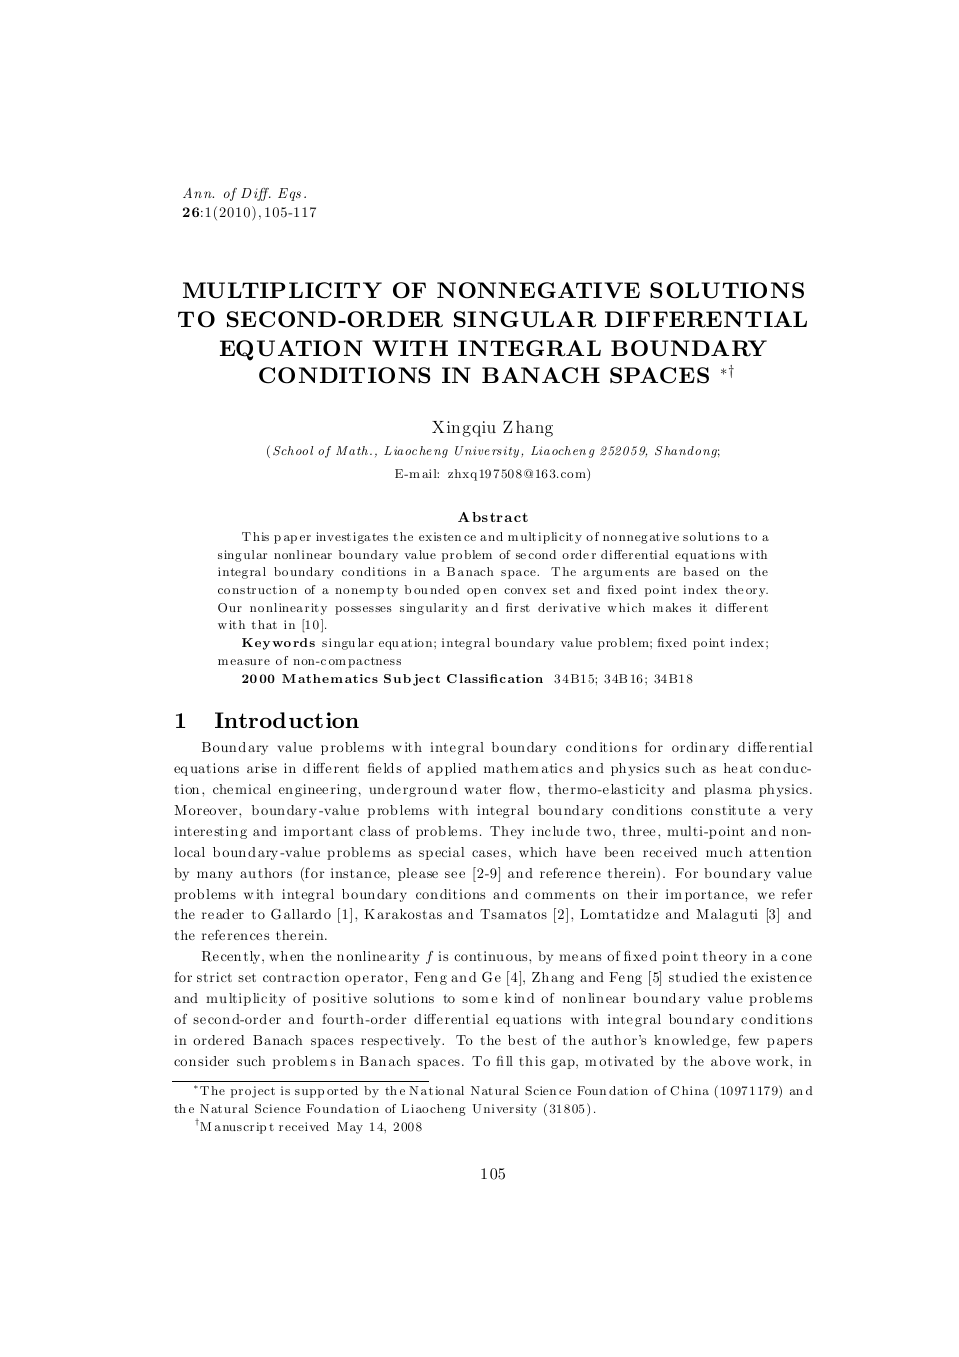 MULTIPLICITY OF NONNEGATIVE SOLUTIONS TO SECOND-ORDER SINGULAR DIFFERENTIAL EQUATION WITH INTEGR